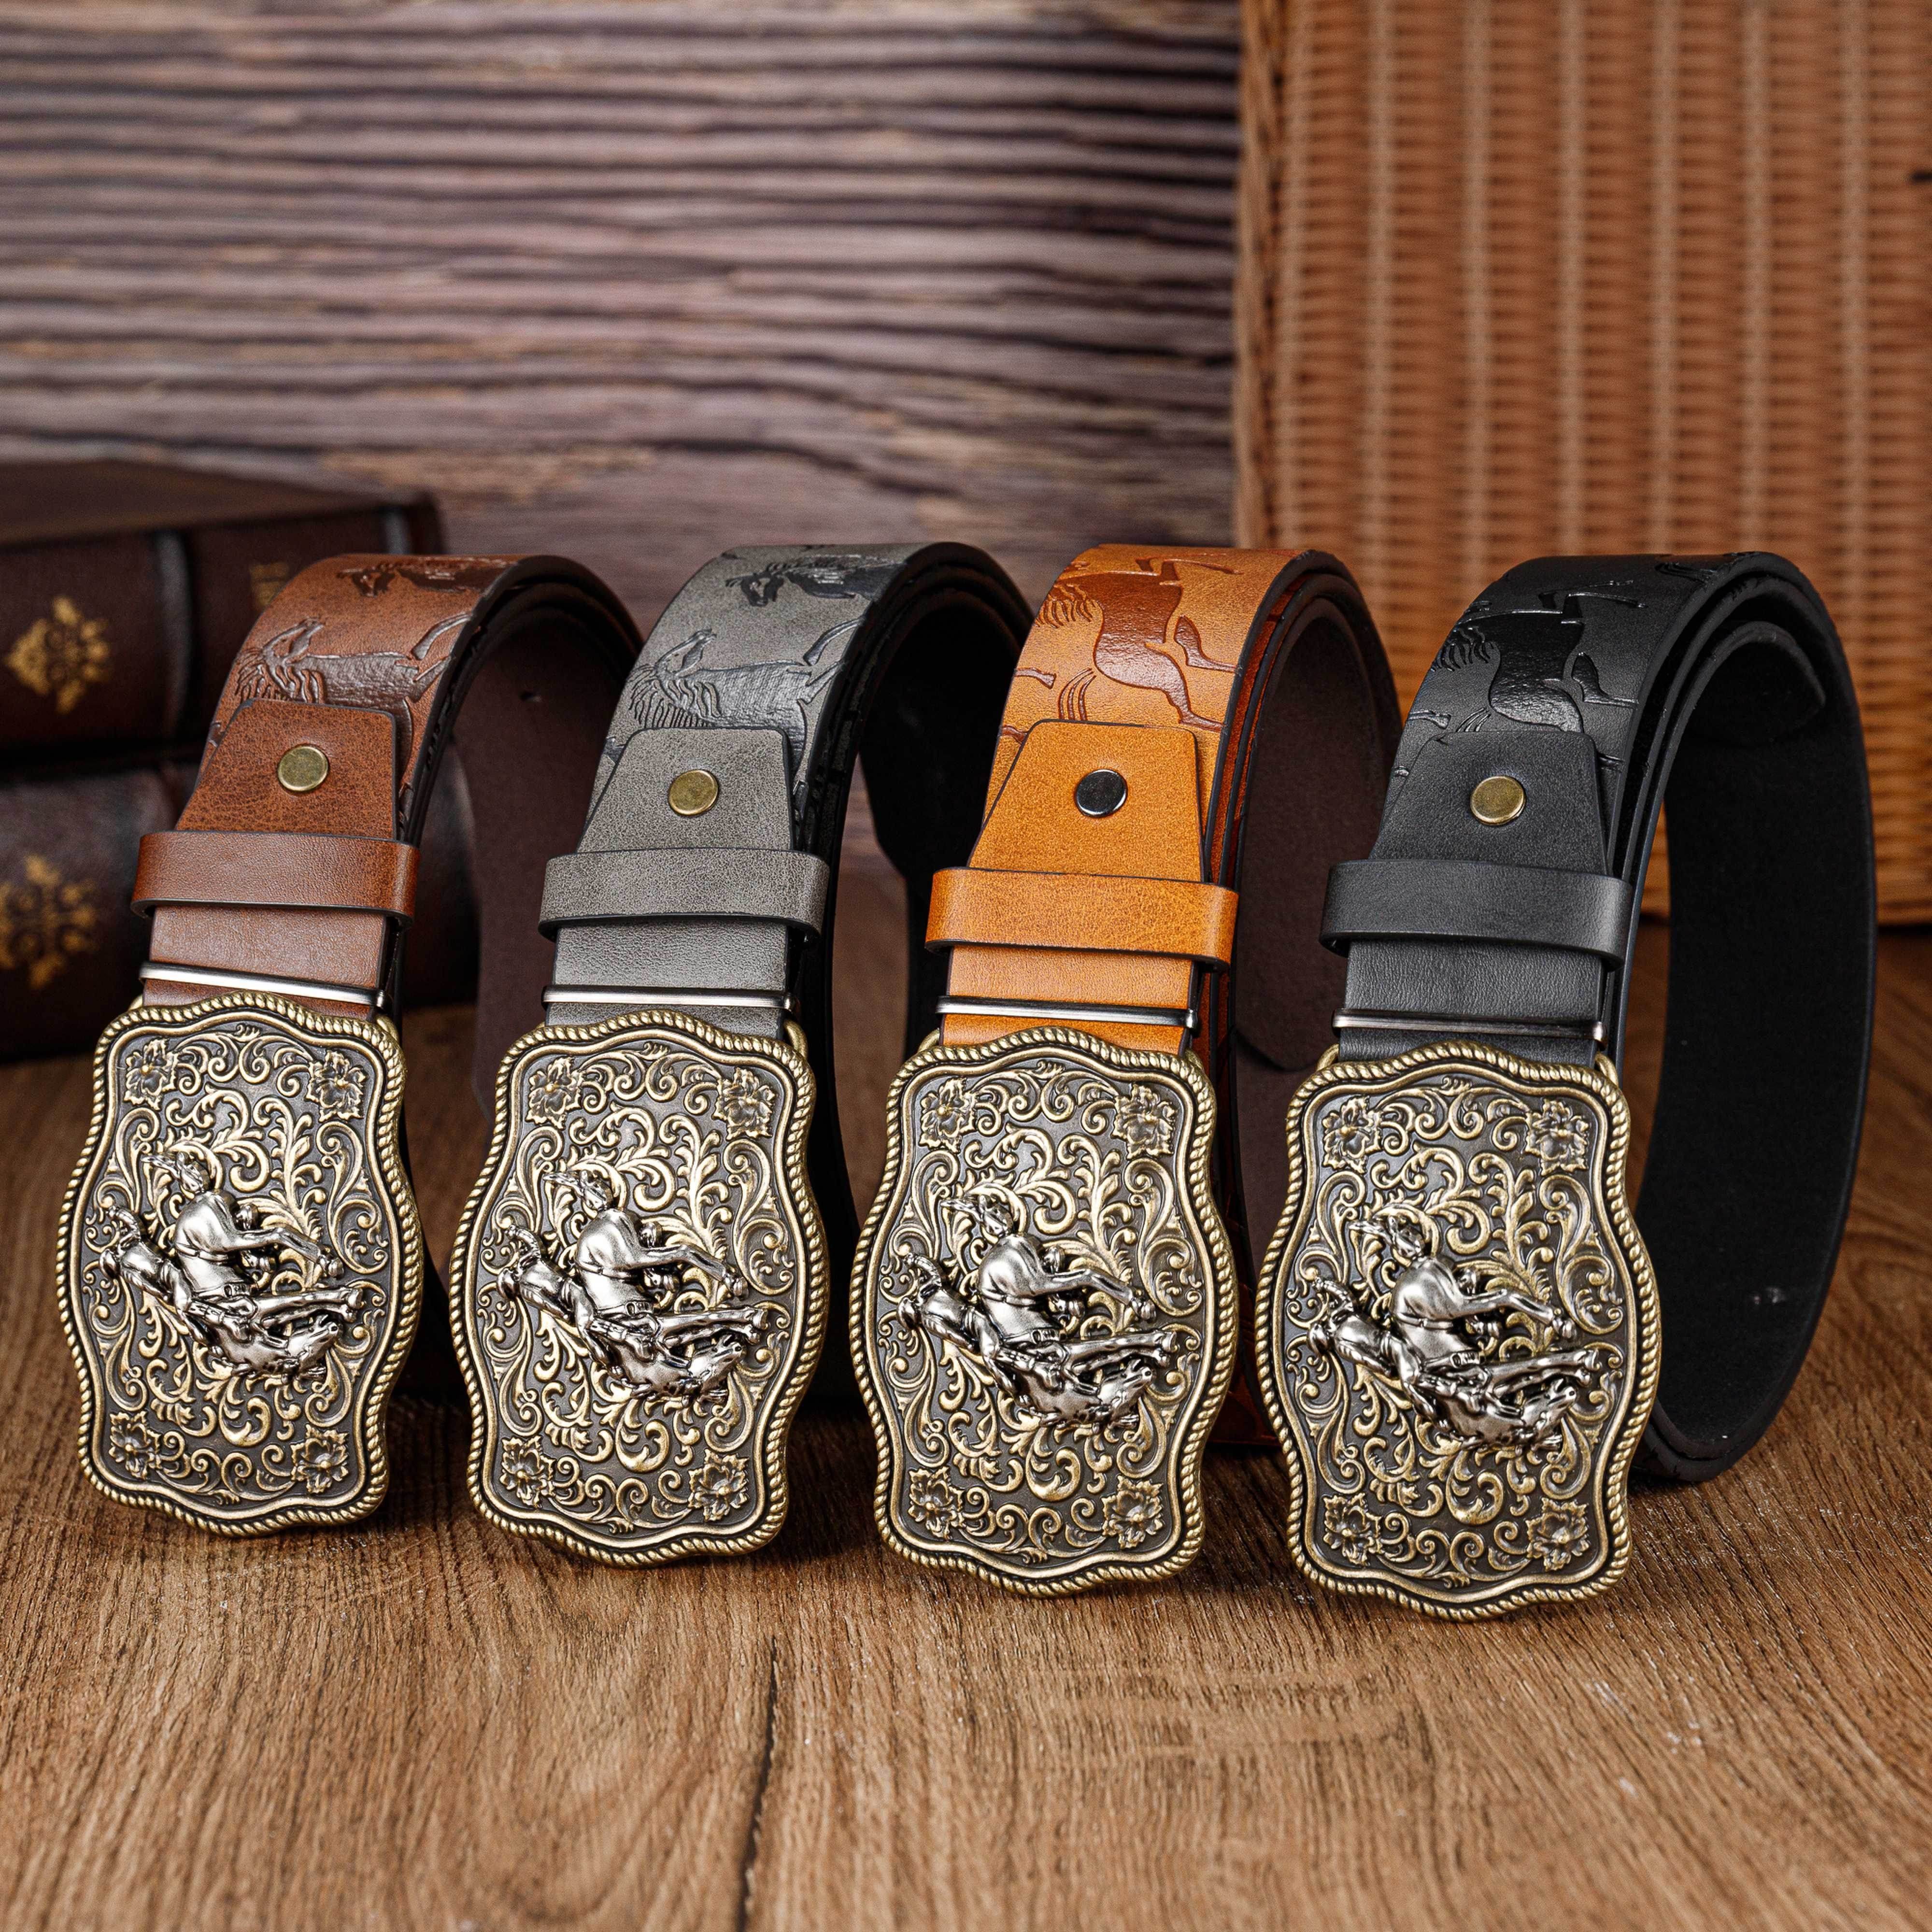 Playing Cards Western Buckle Embossed Mens Casual Belt Fashion Pu